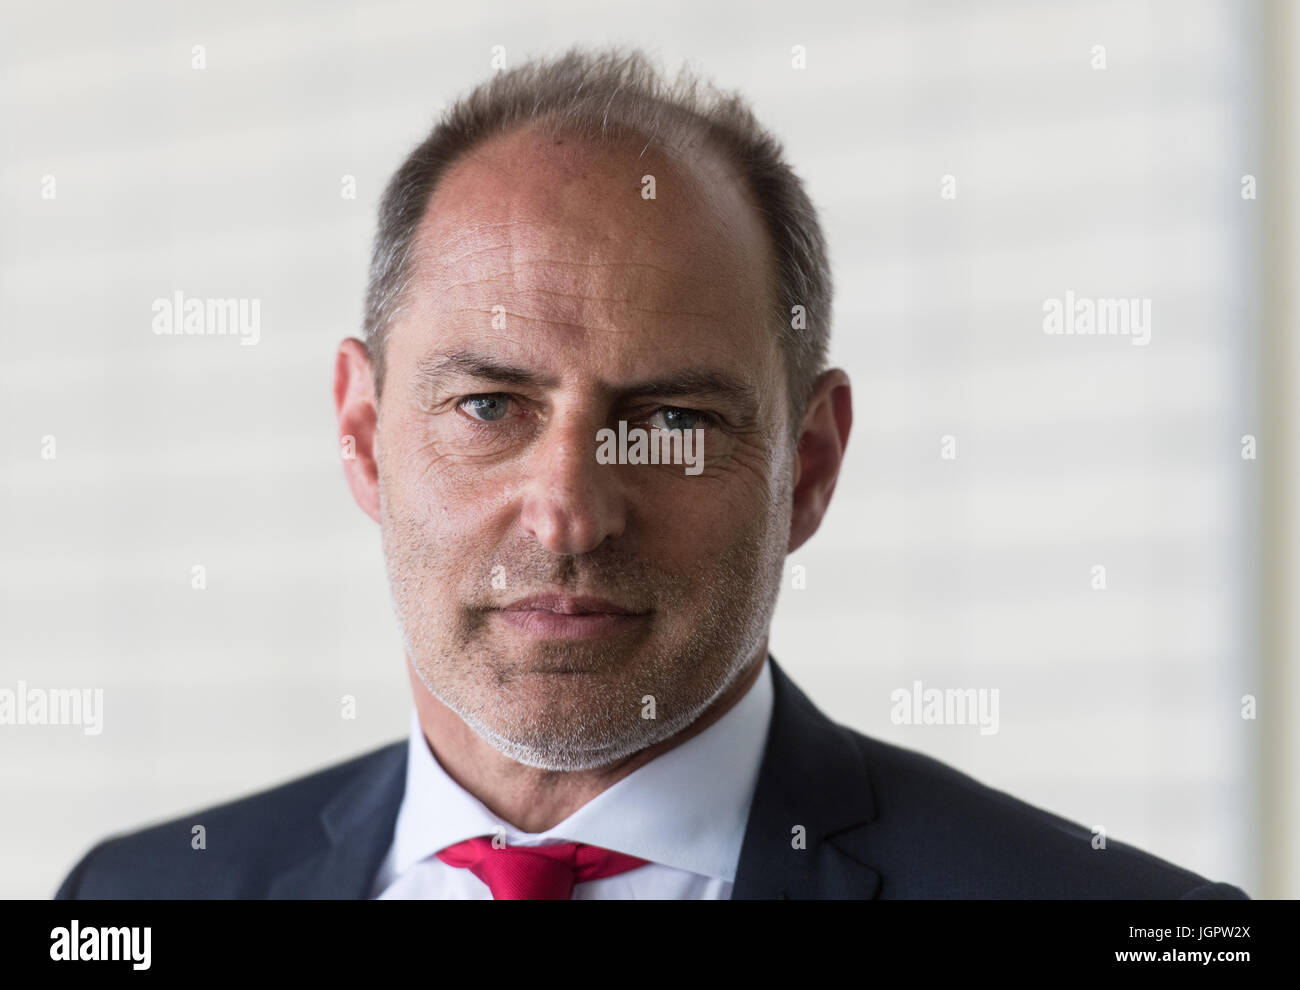 Andreas Schneider High Resolution Stock Photography And Images Alamy